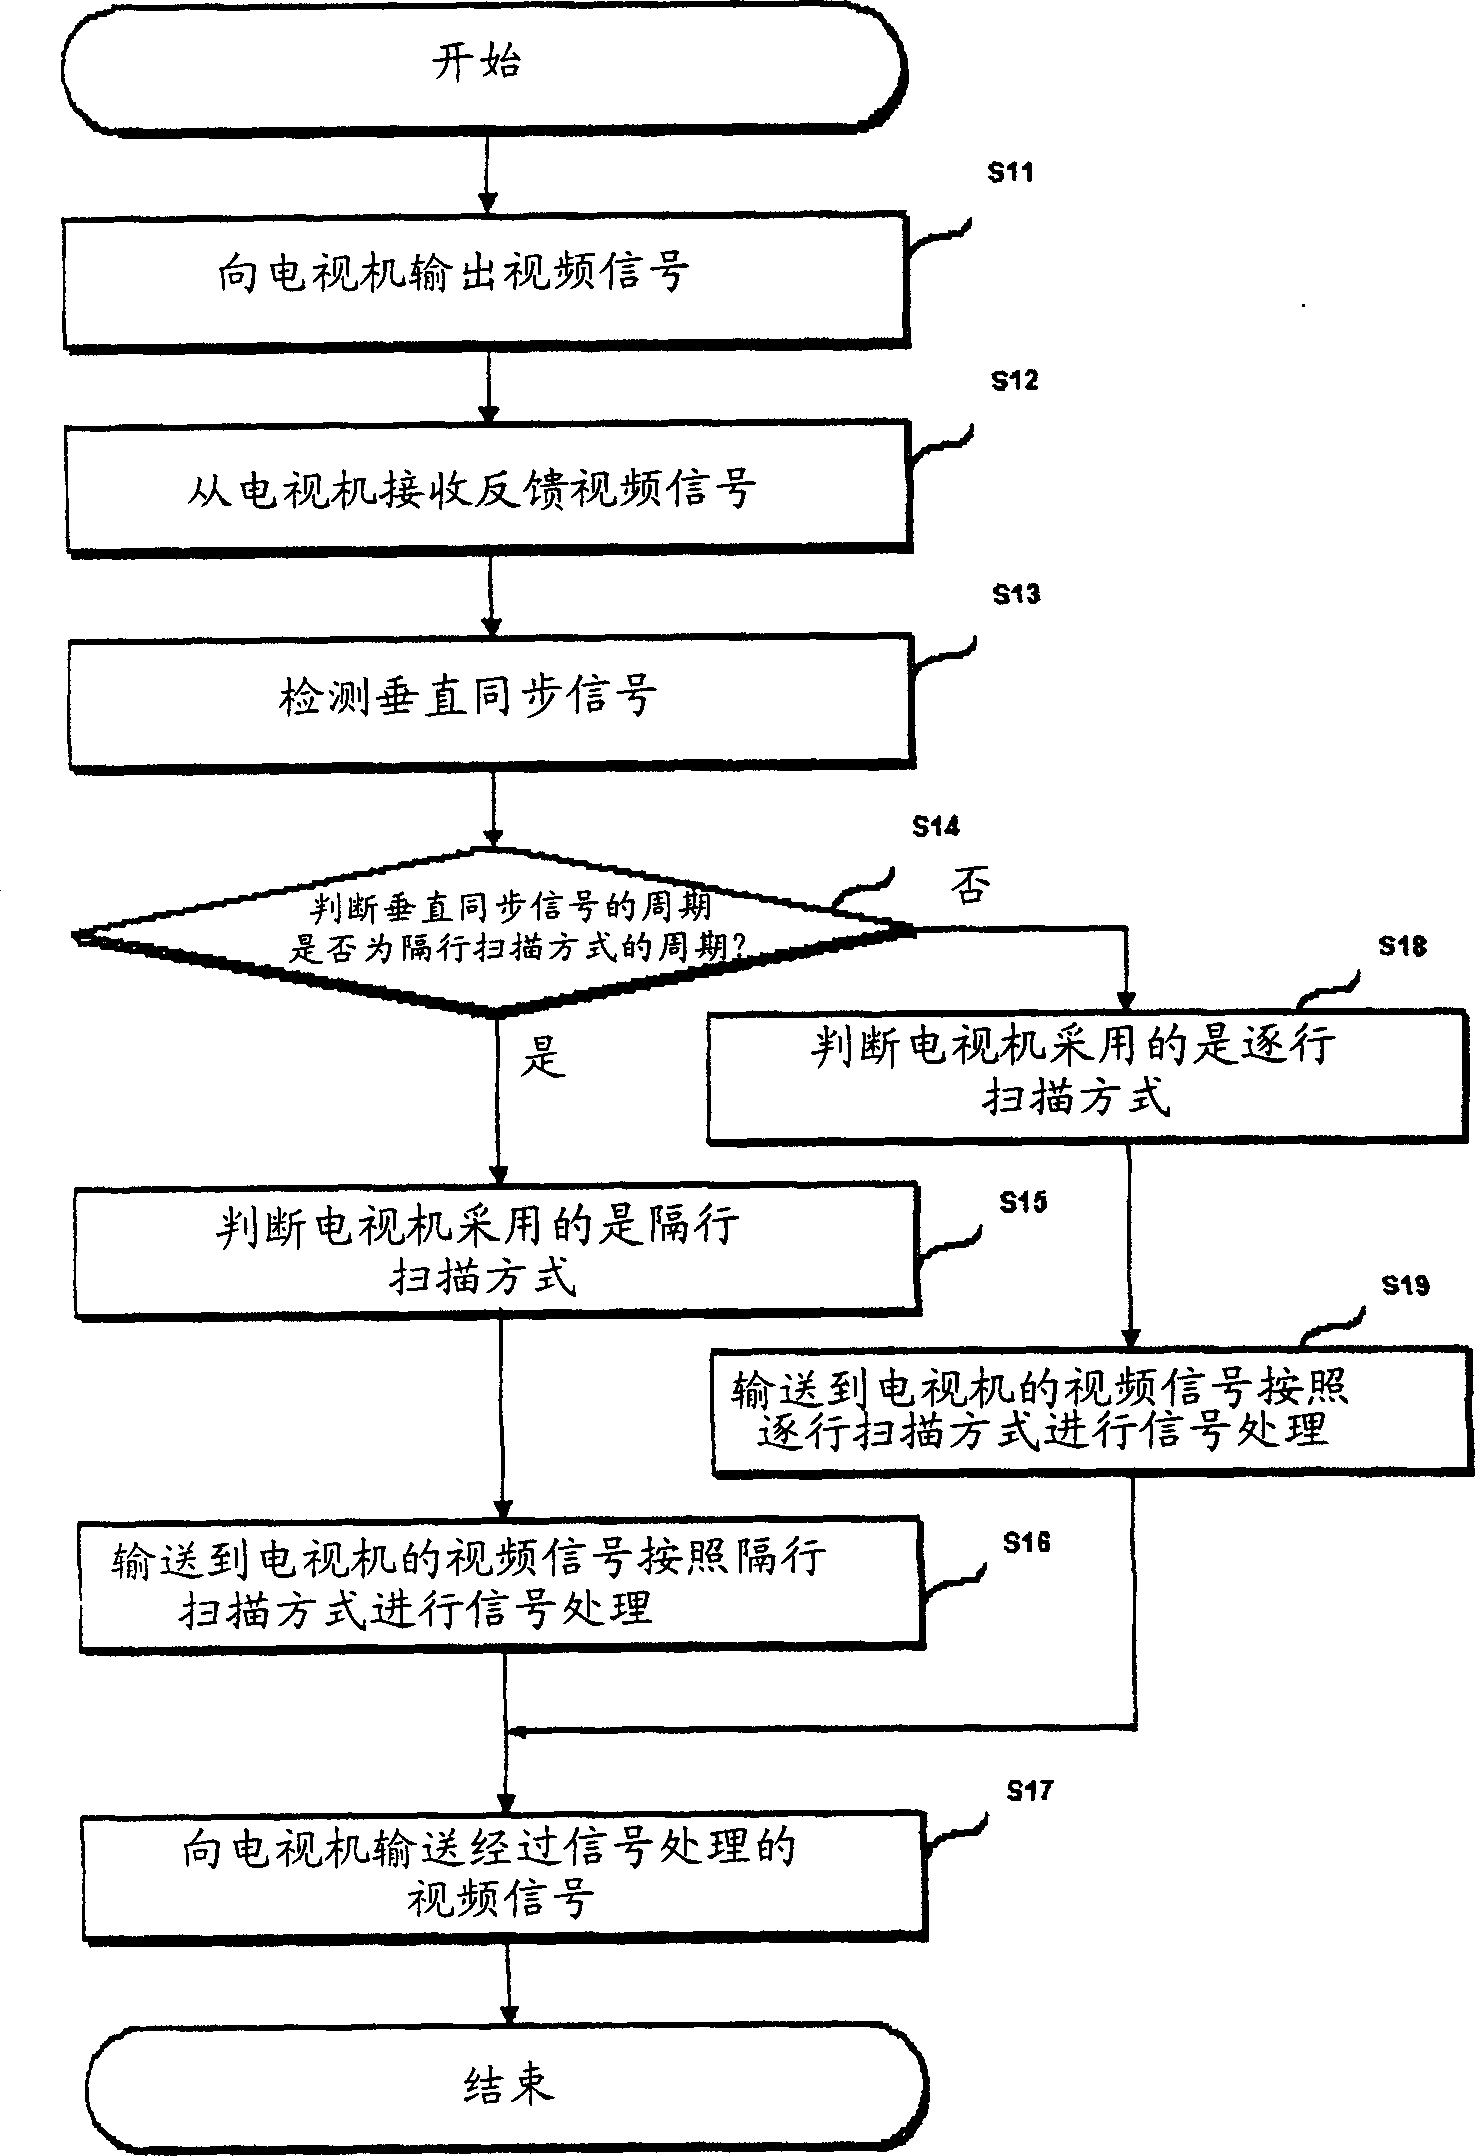 Method for processing output signal in optical disk apparatus according to scanning mode of TV set